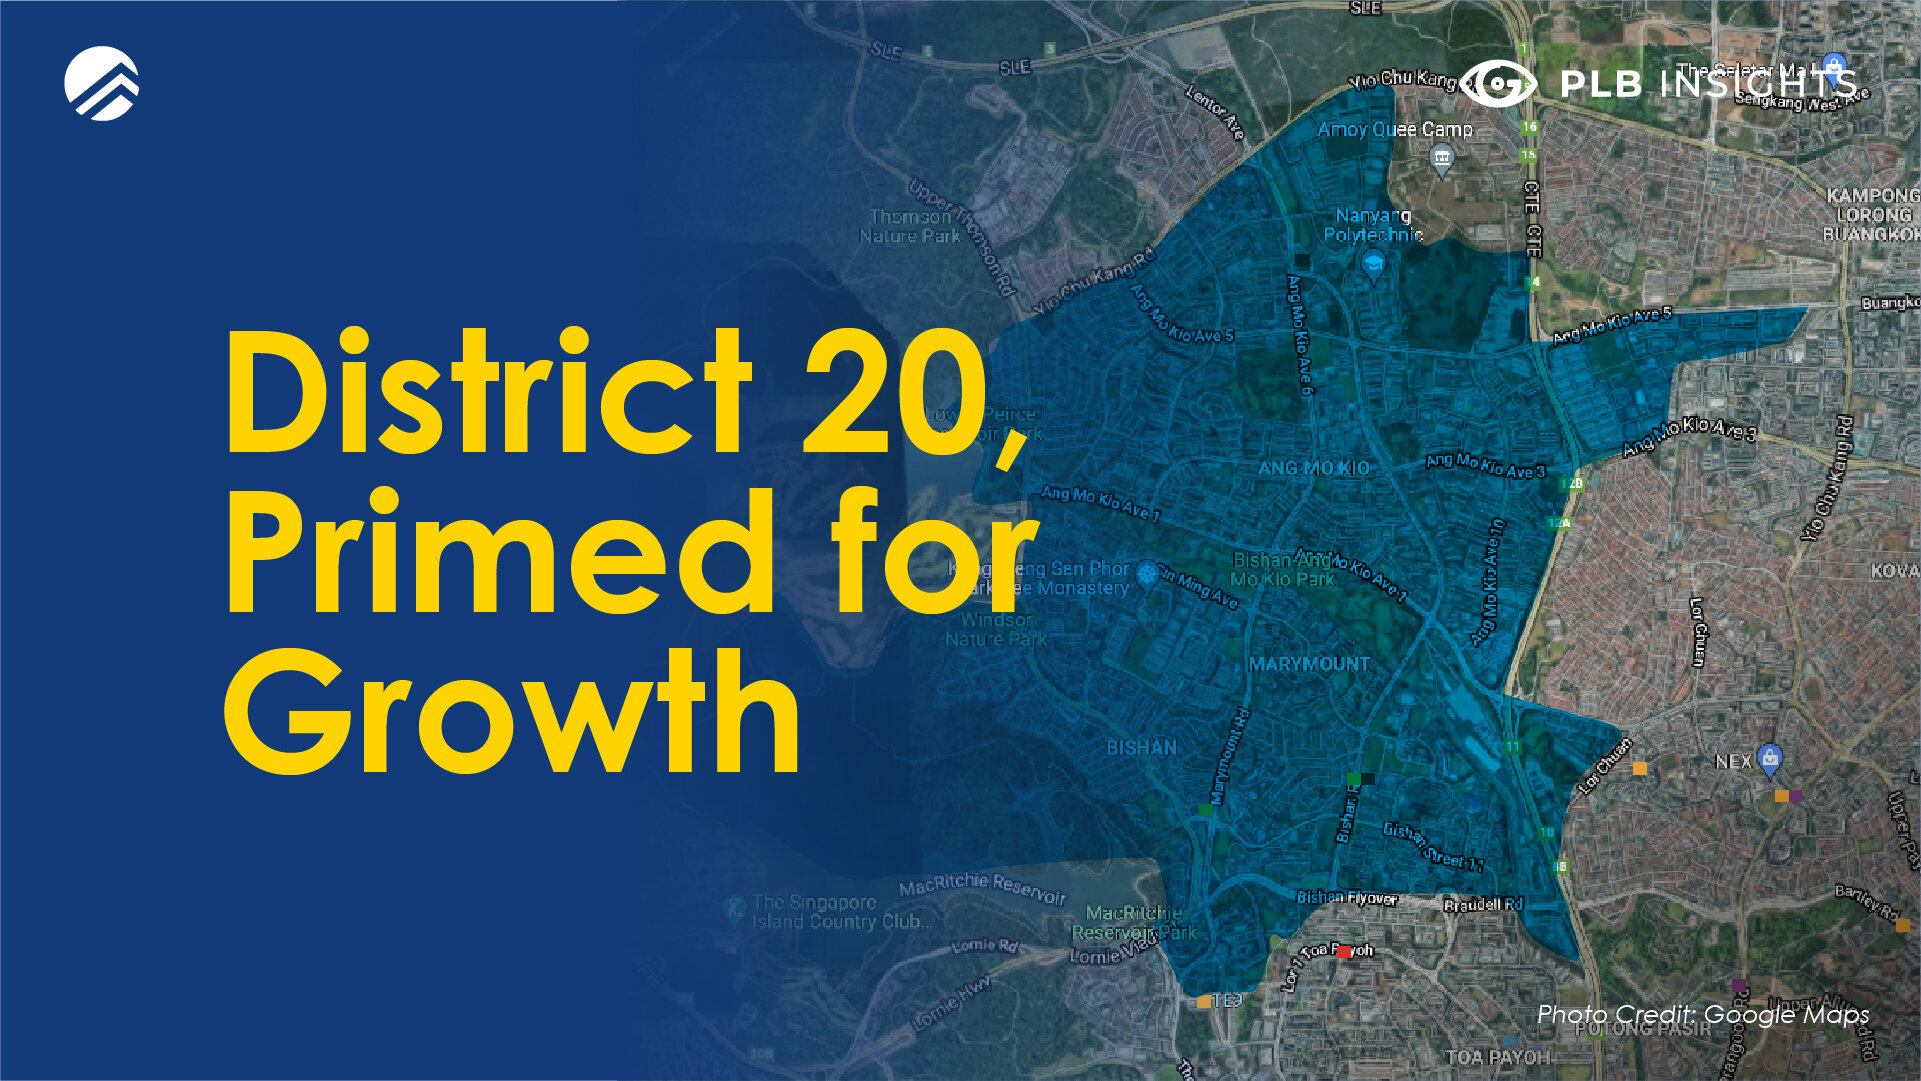 District 20, Primed for Growth_Article Cover.jpg